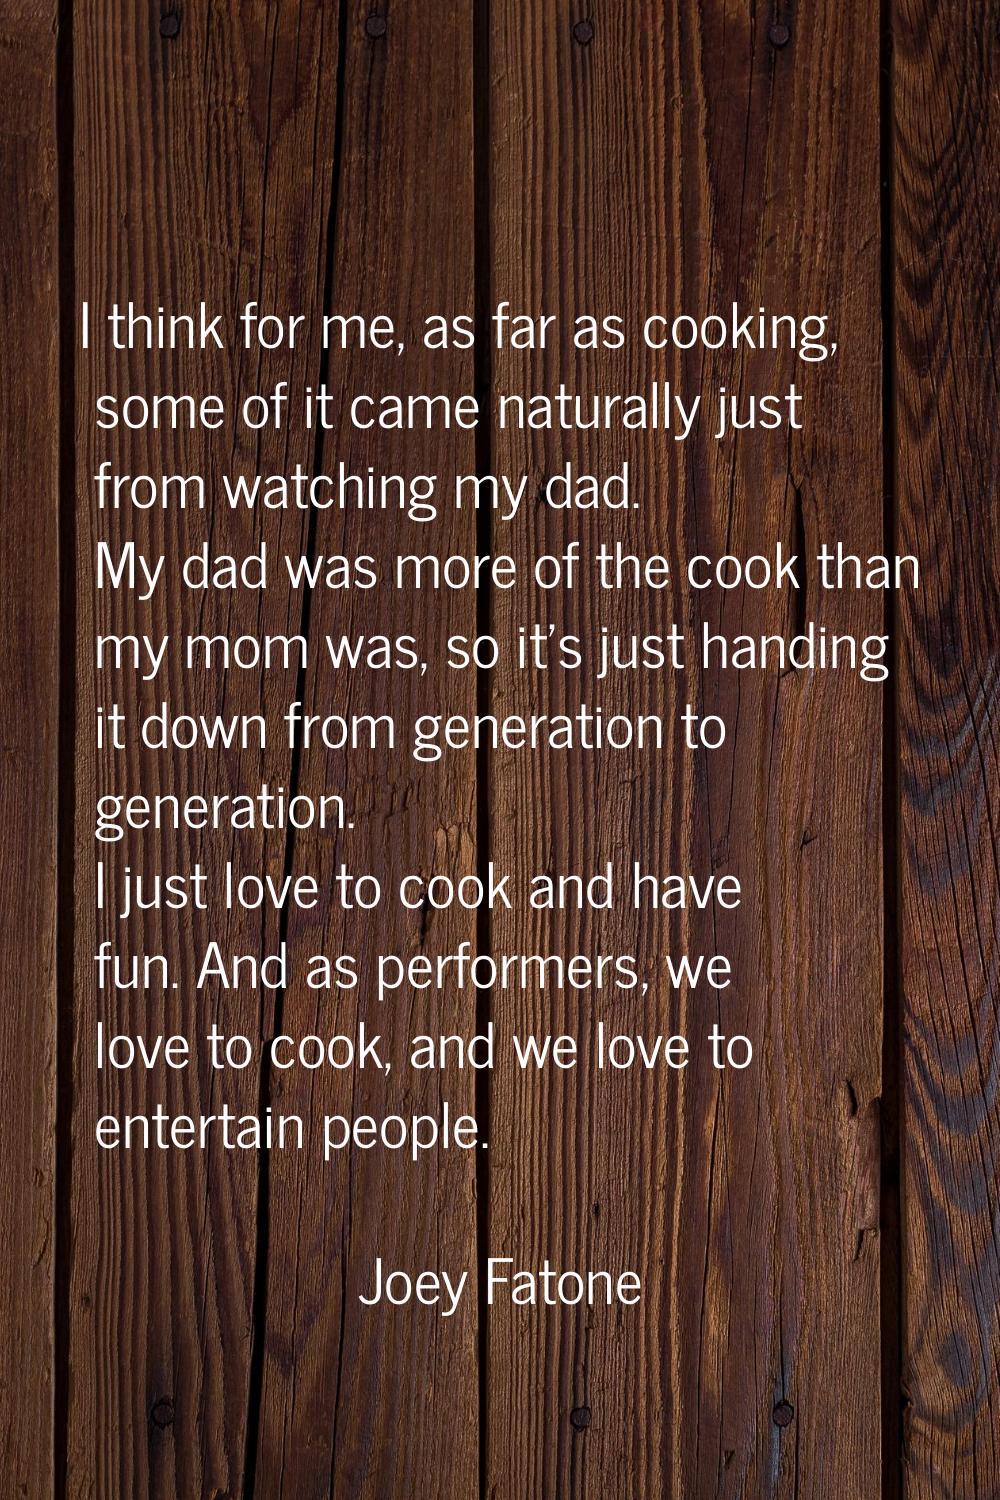 I think for me, as far as cooking, some of it came naturally just from watching my dad. My dad was 